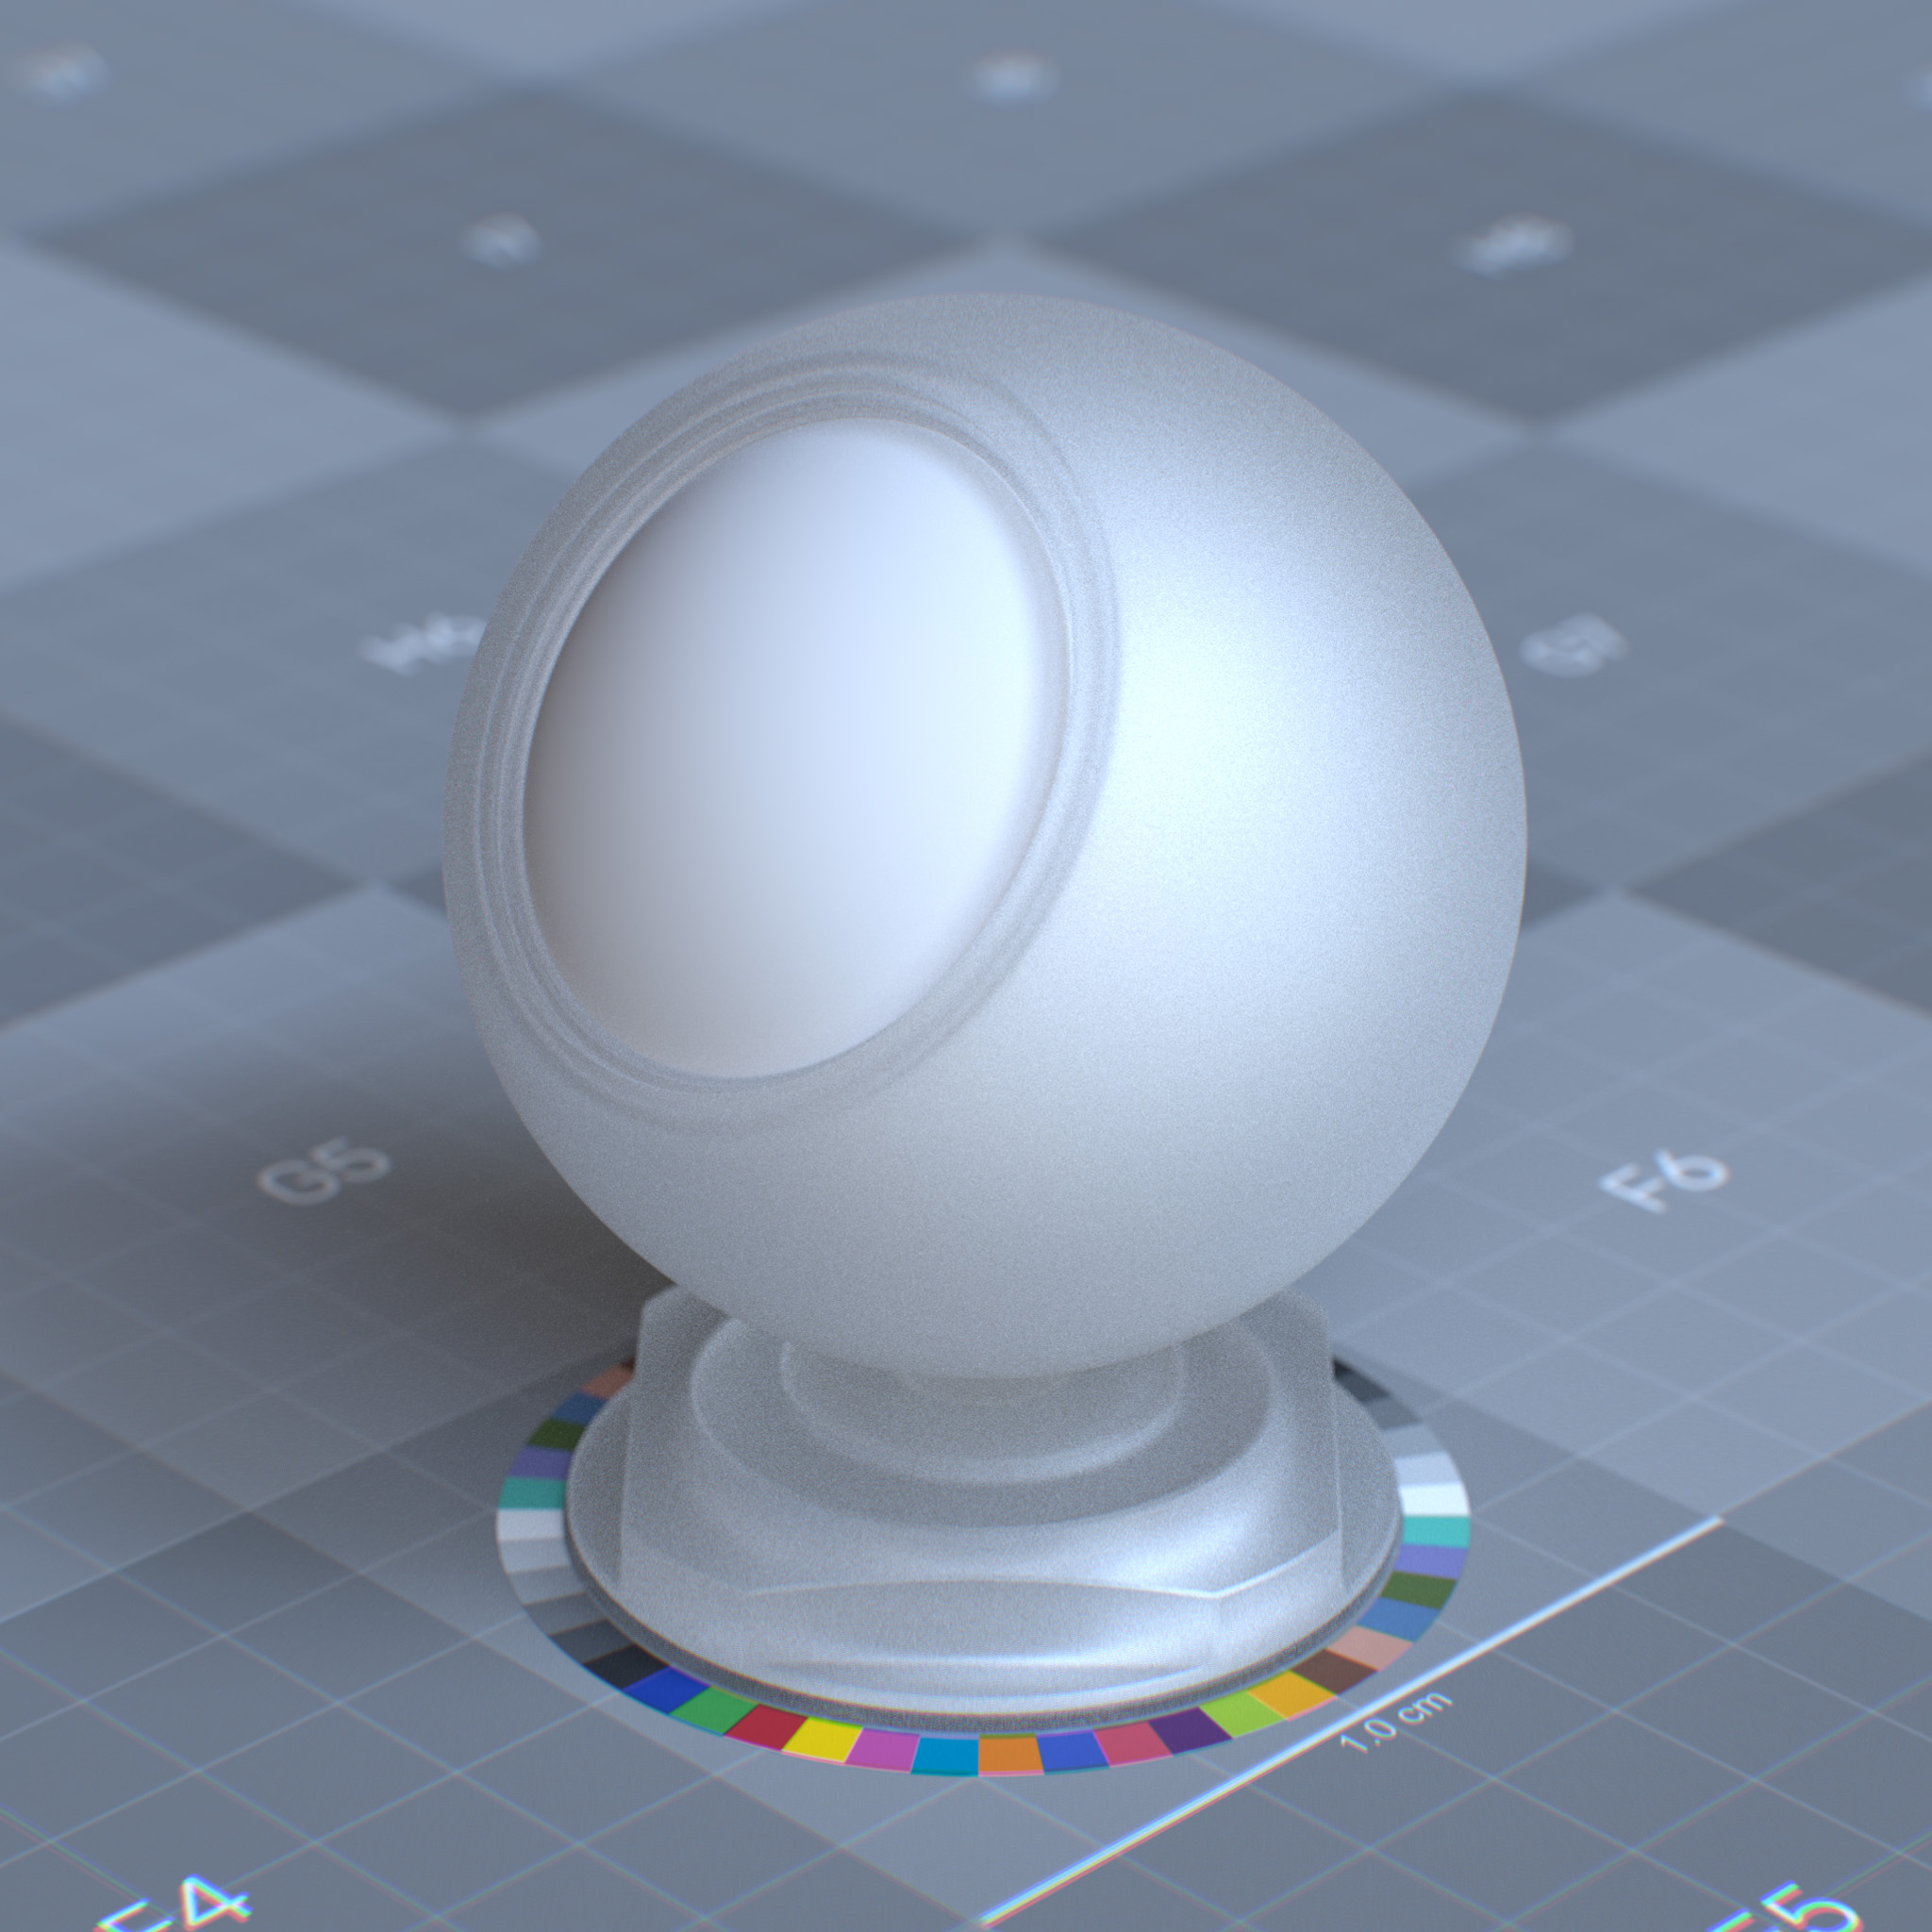 rtx_material_omnisurfacebase_specular_reflection_roughness_0p5_refraction